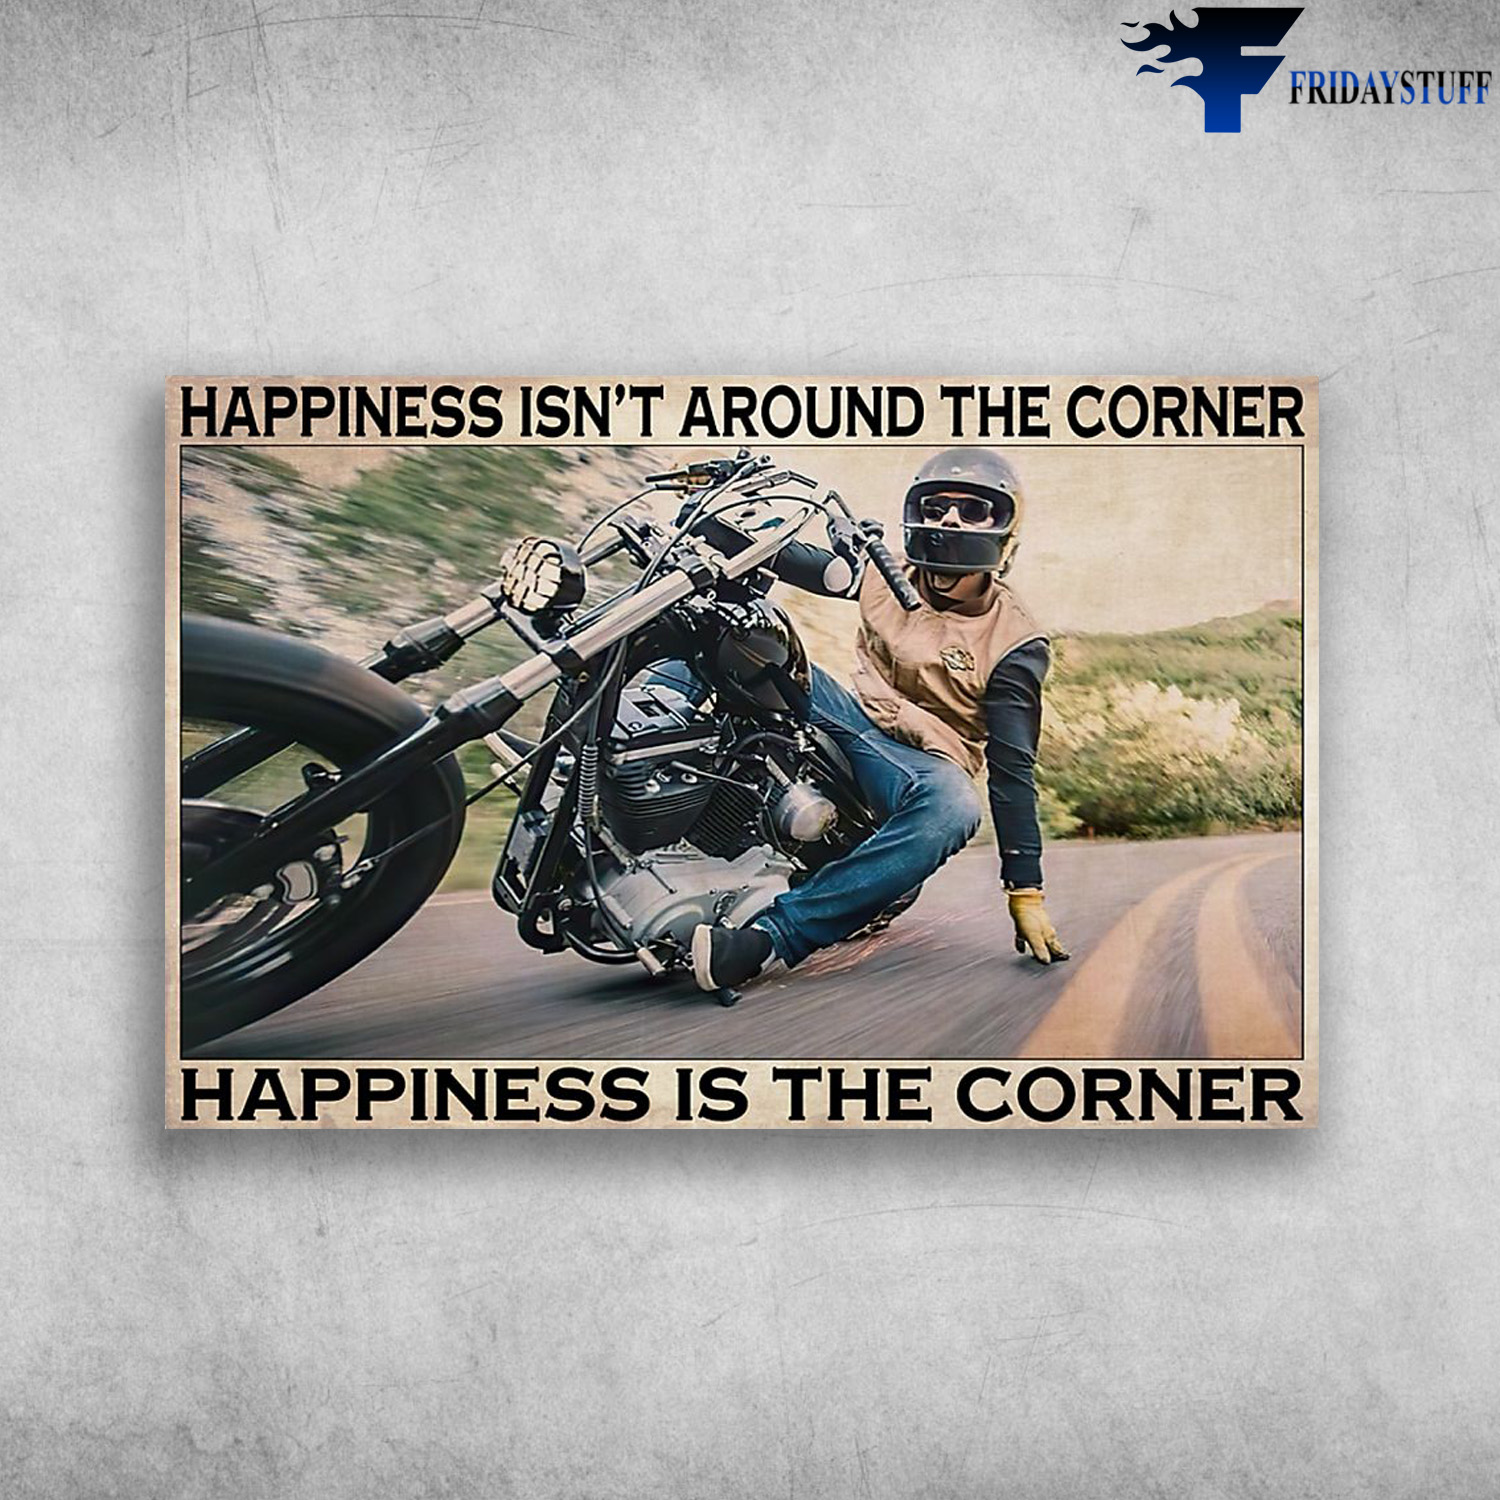 Motorcycle Corner Happiness Man Riding Motorcycle On-Road - Happiness Isn't Around The Corner